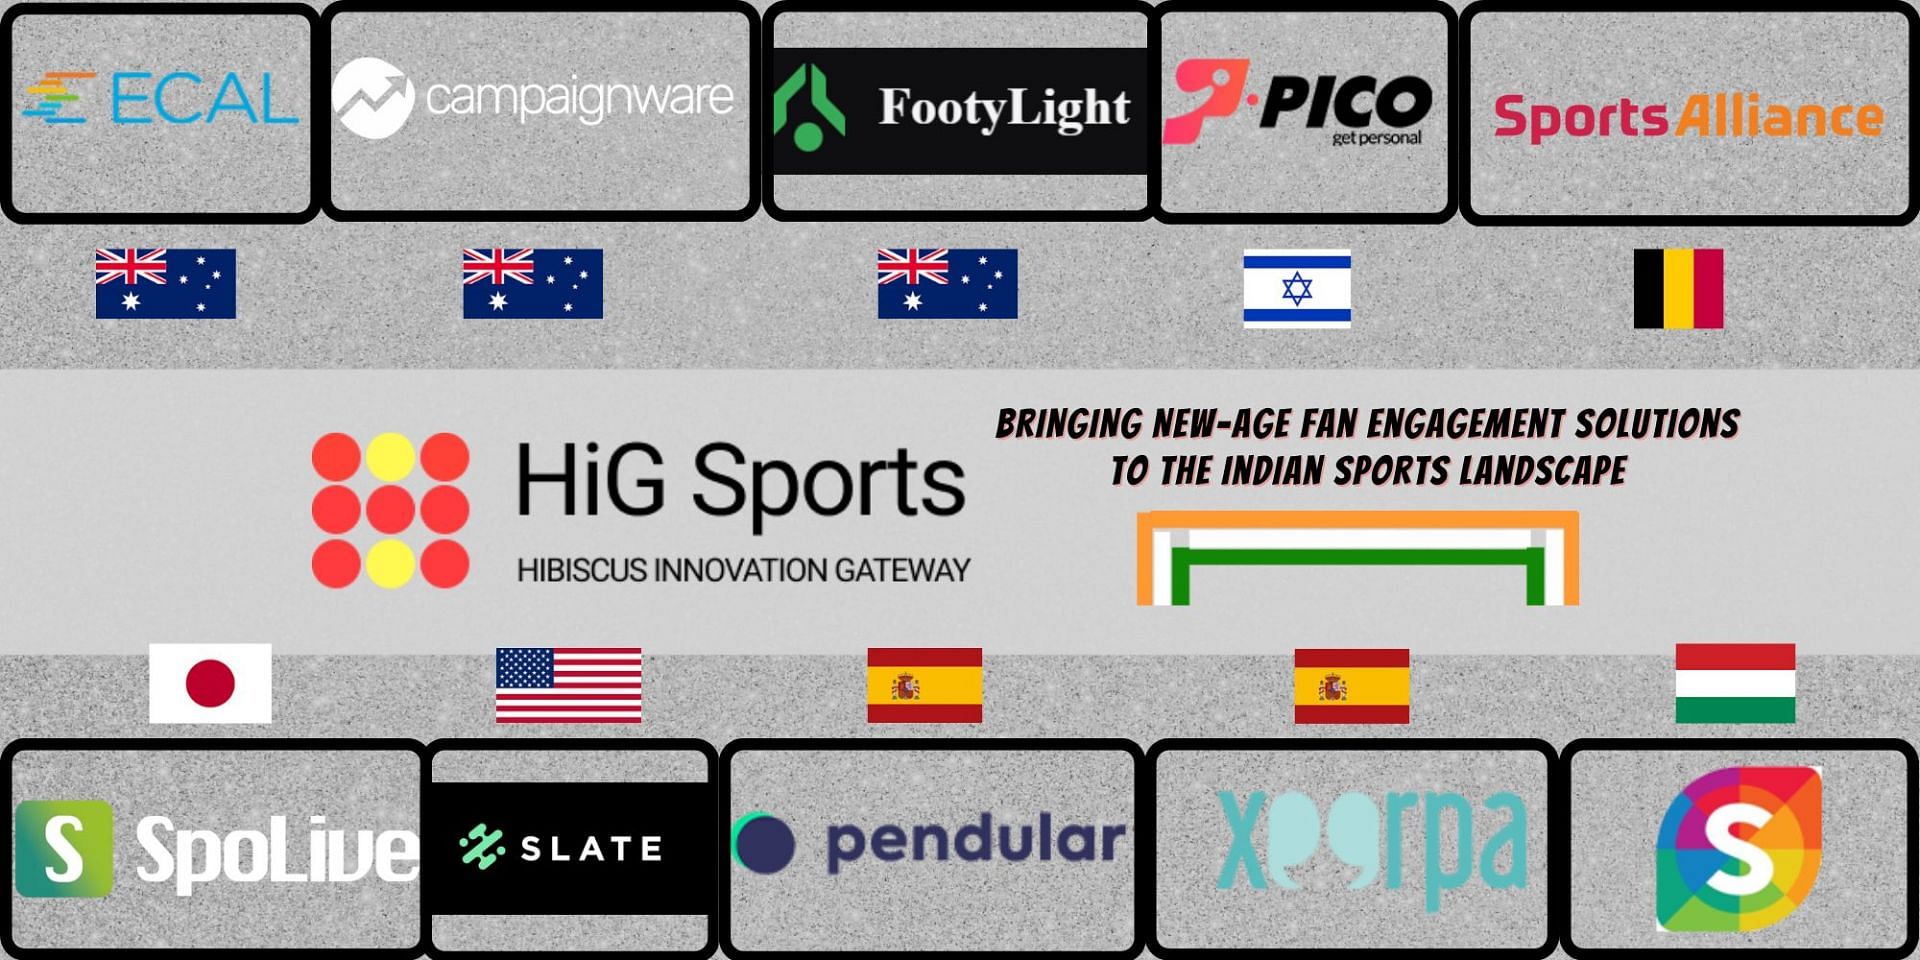 HiG Sports provides innovative solutions for fan engagement in sports (Image via HiG Sports)